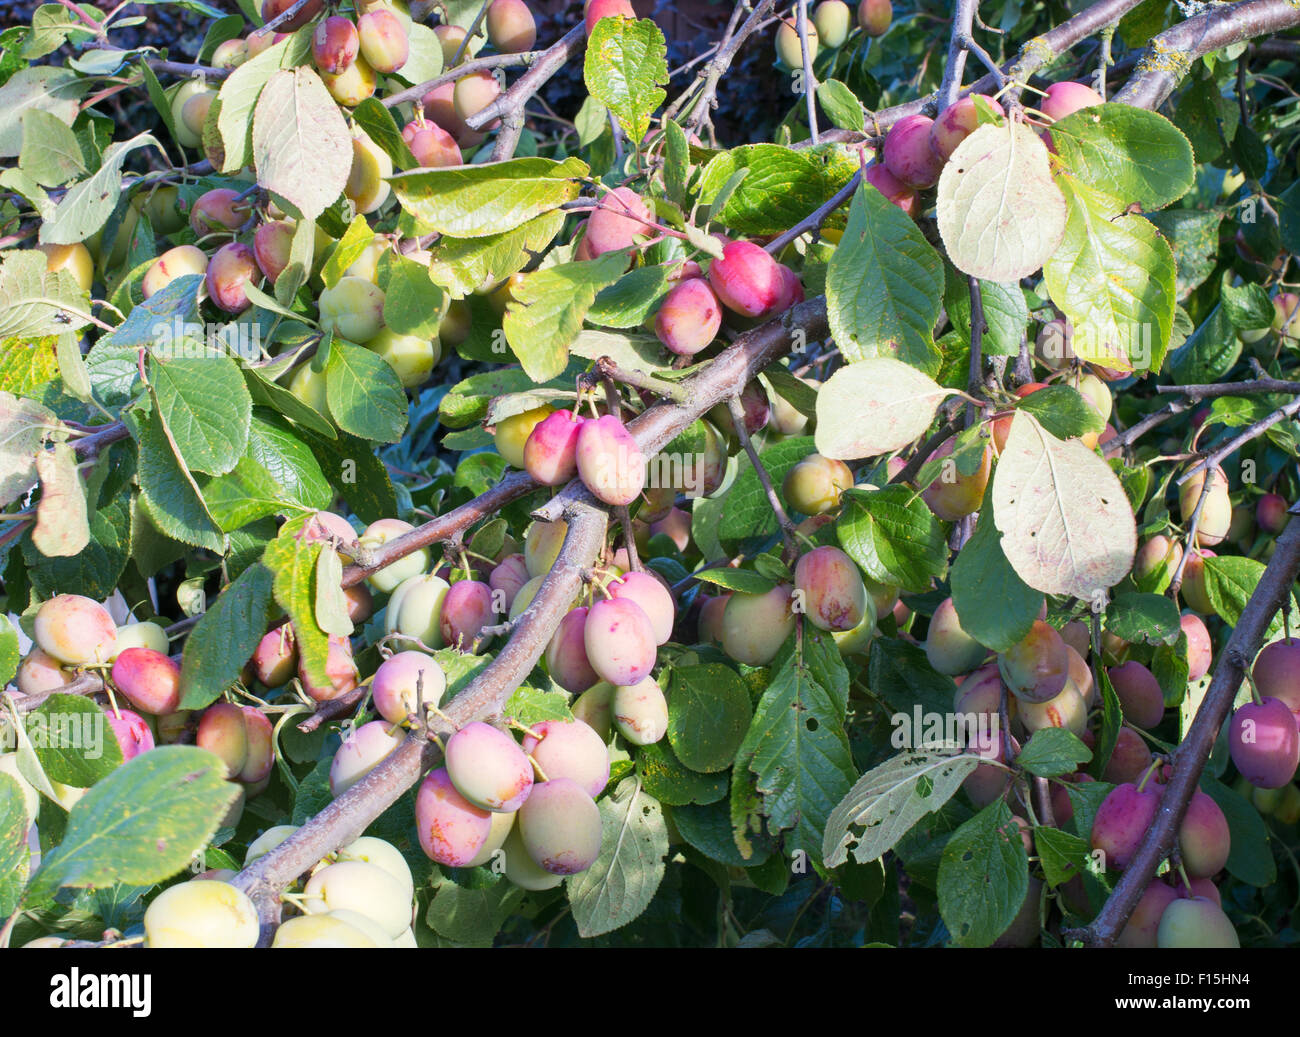 The branches of a Victoria Plum tree laden with immature fruit, North East, England, UK Stock Photo